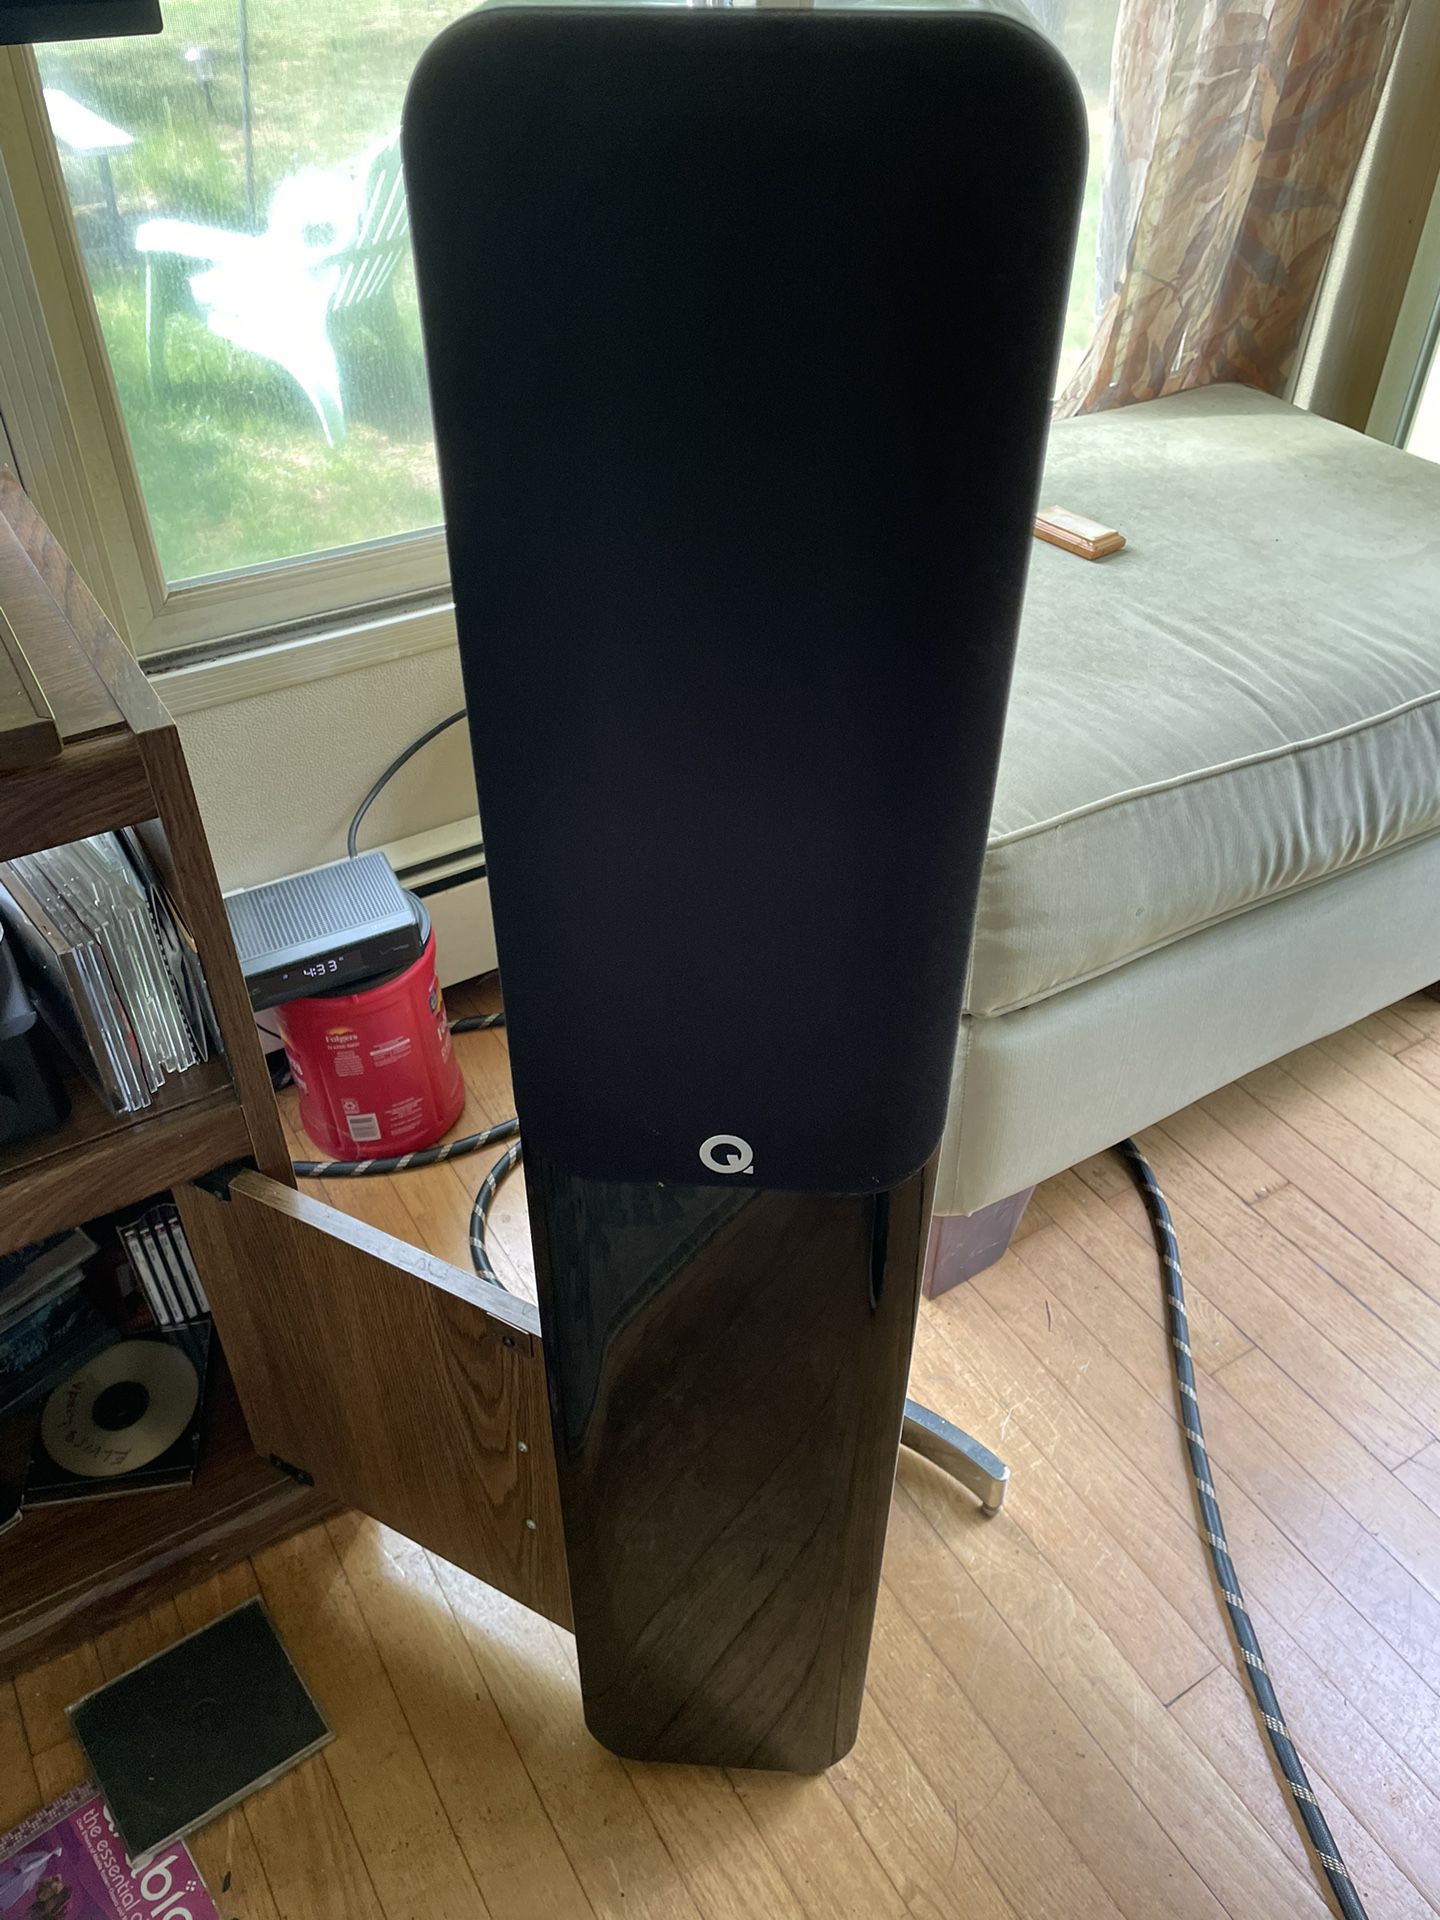 Q Acoustic concept 50 Speakers (this is for 2 speakers)